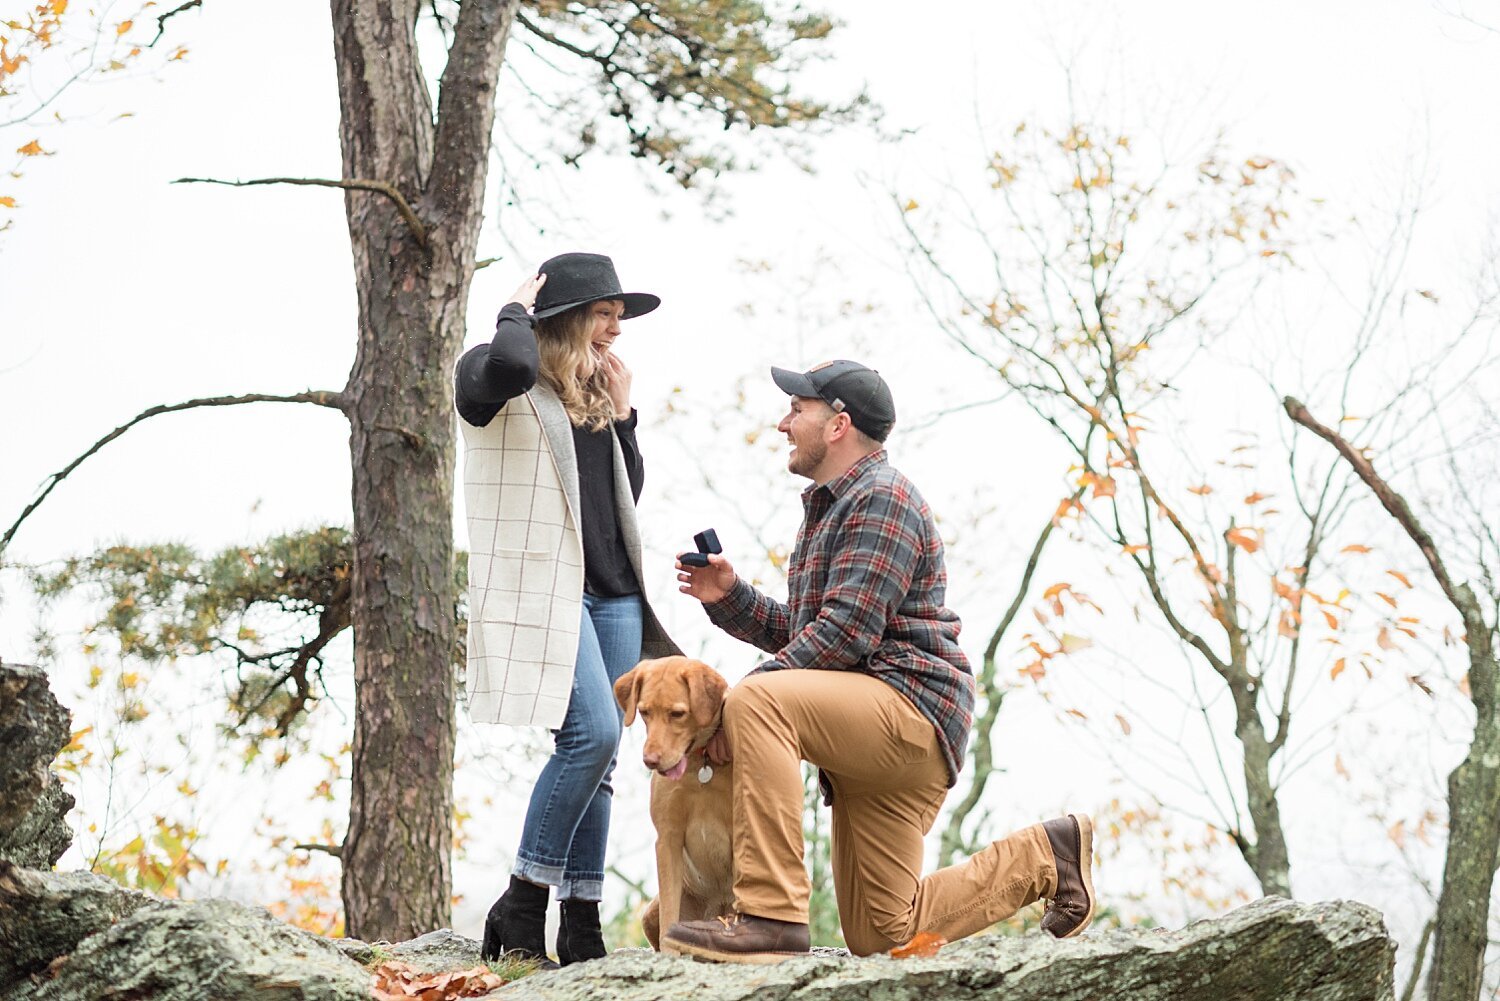 Pinnacle Overlook Holtwood PA Surprise Proposal Photography_8727.jpg